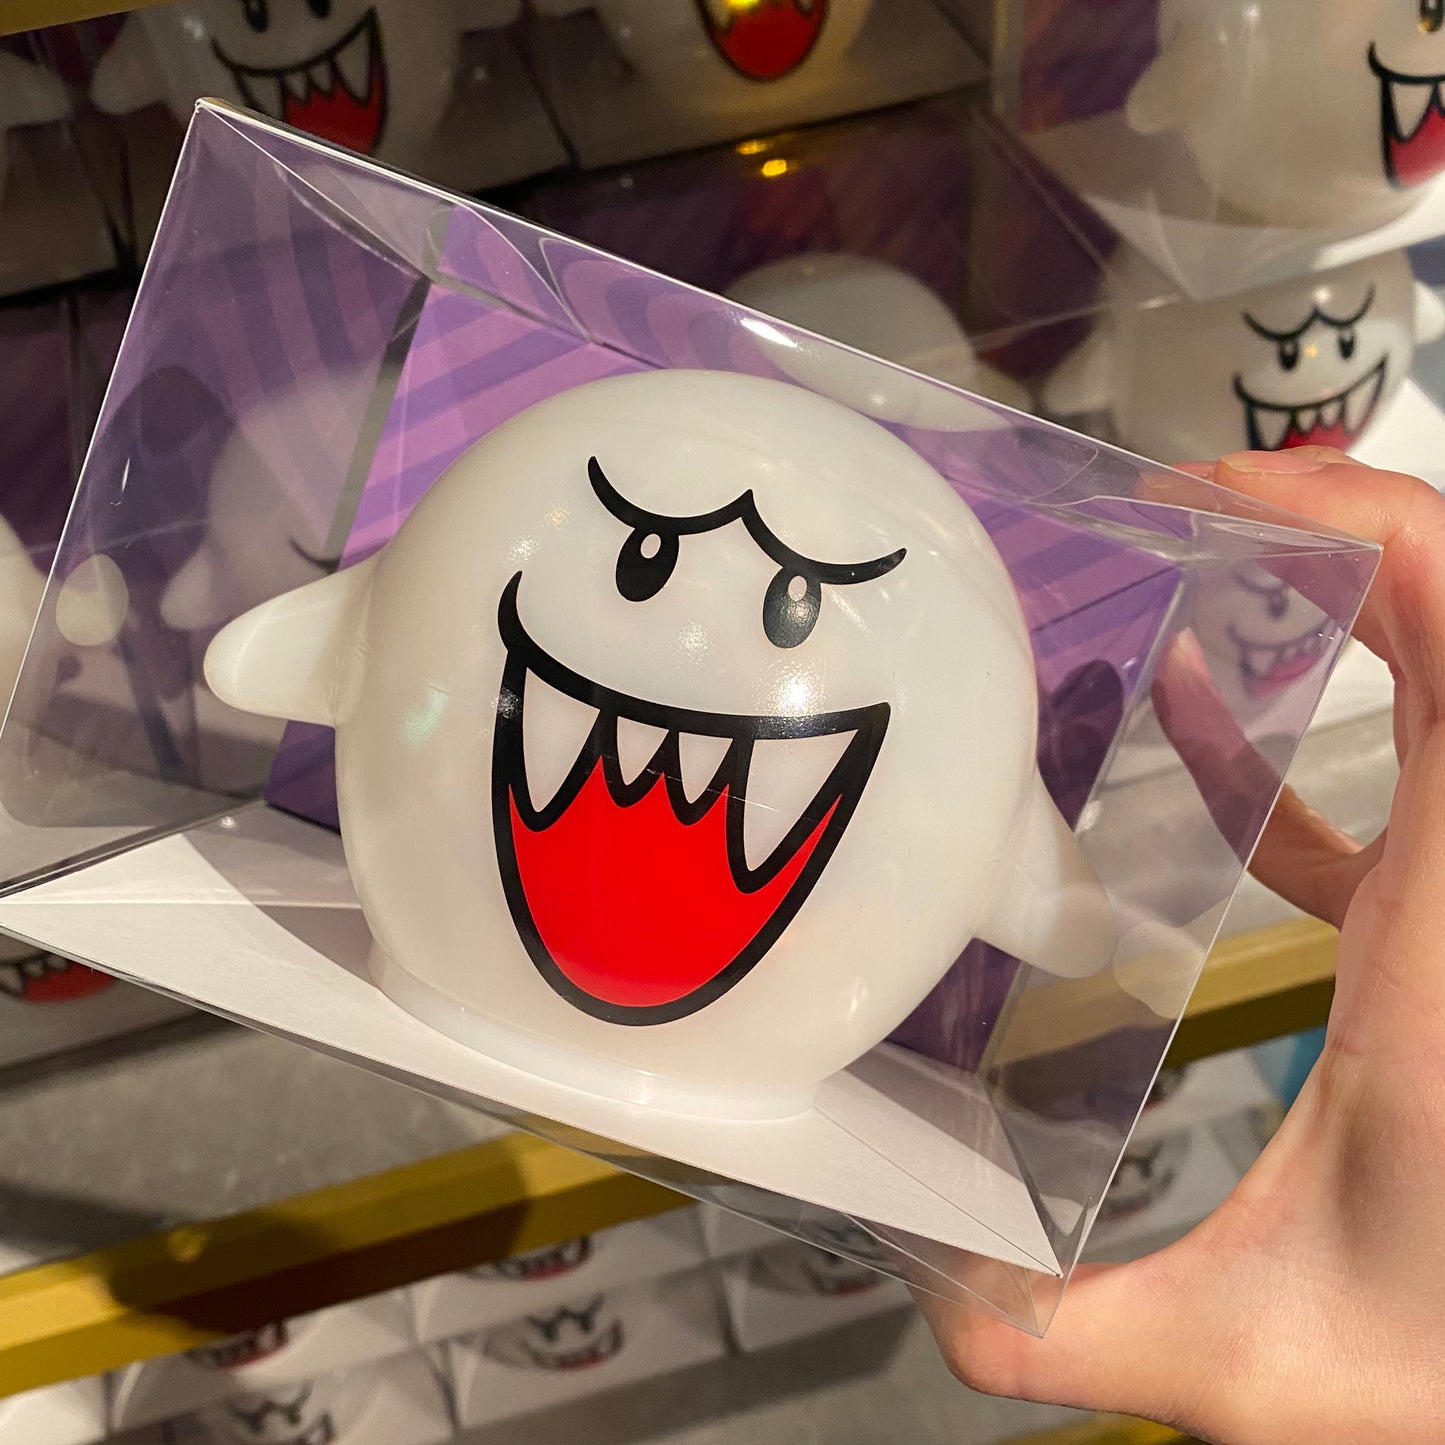 【Order】USJ Mario Ghost Boo Cotton Candy